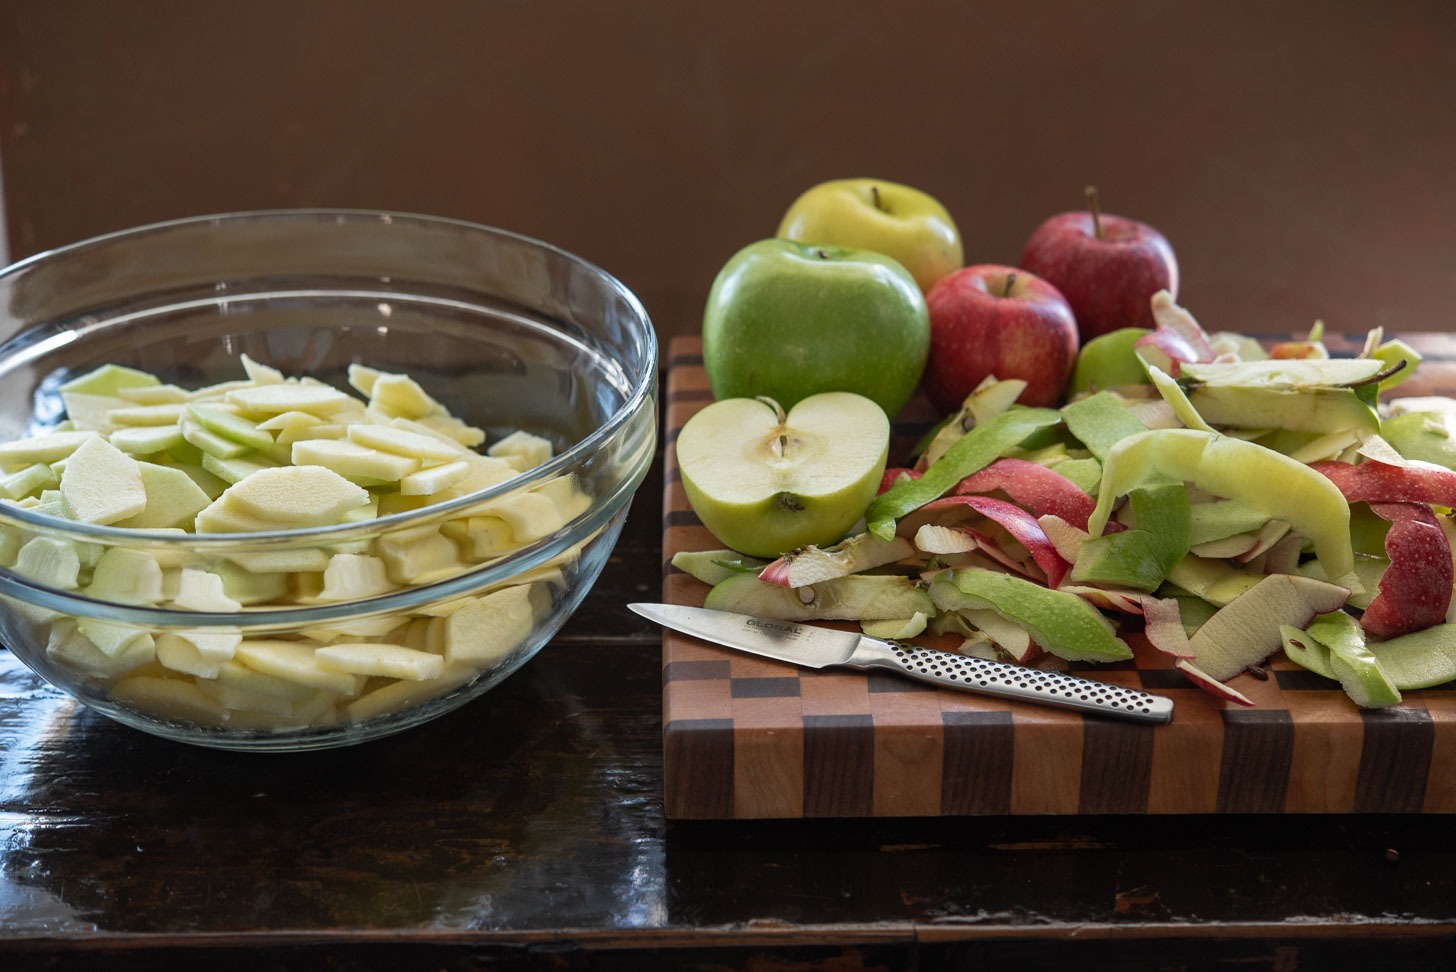 Apples are peeled and sliced into small pieces.